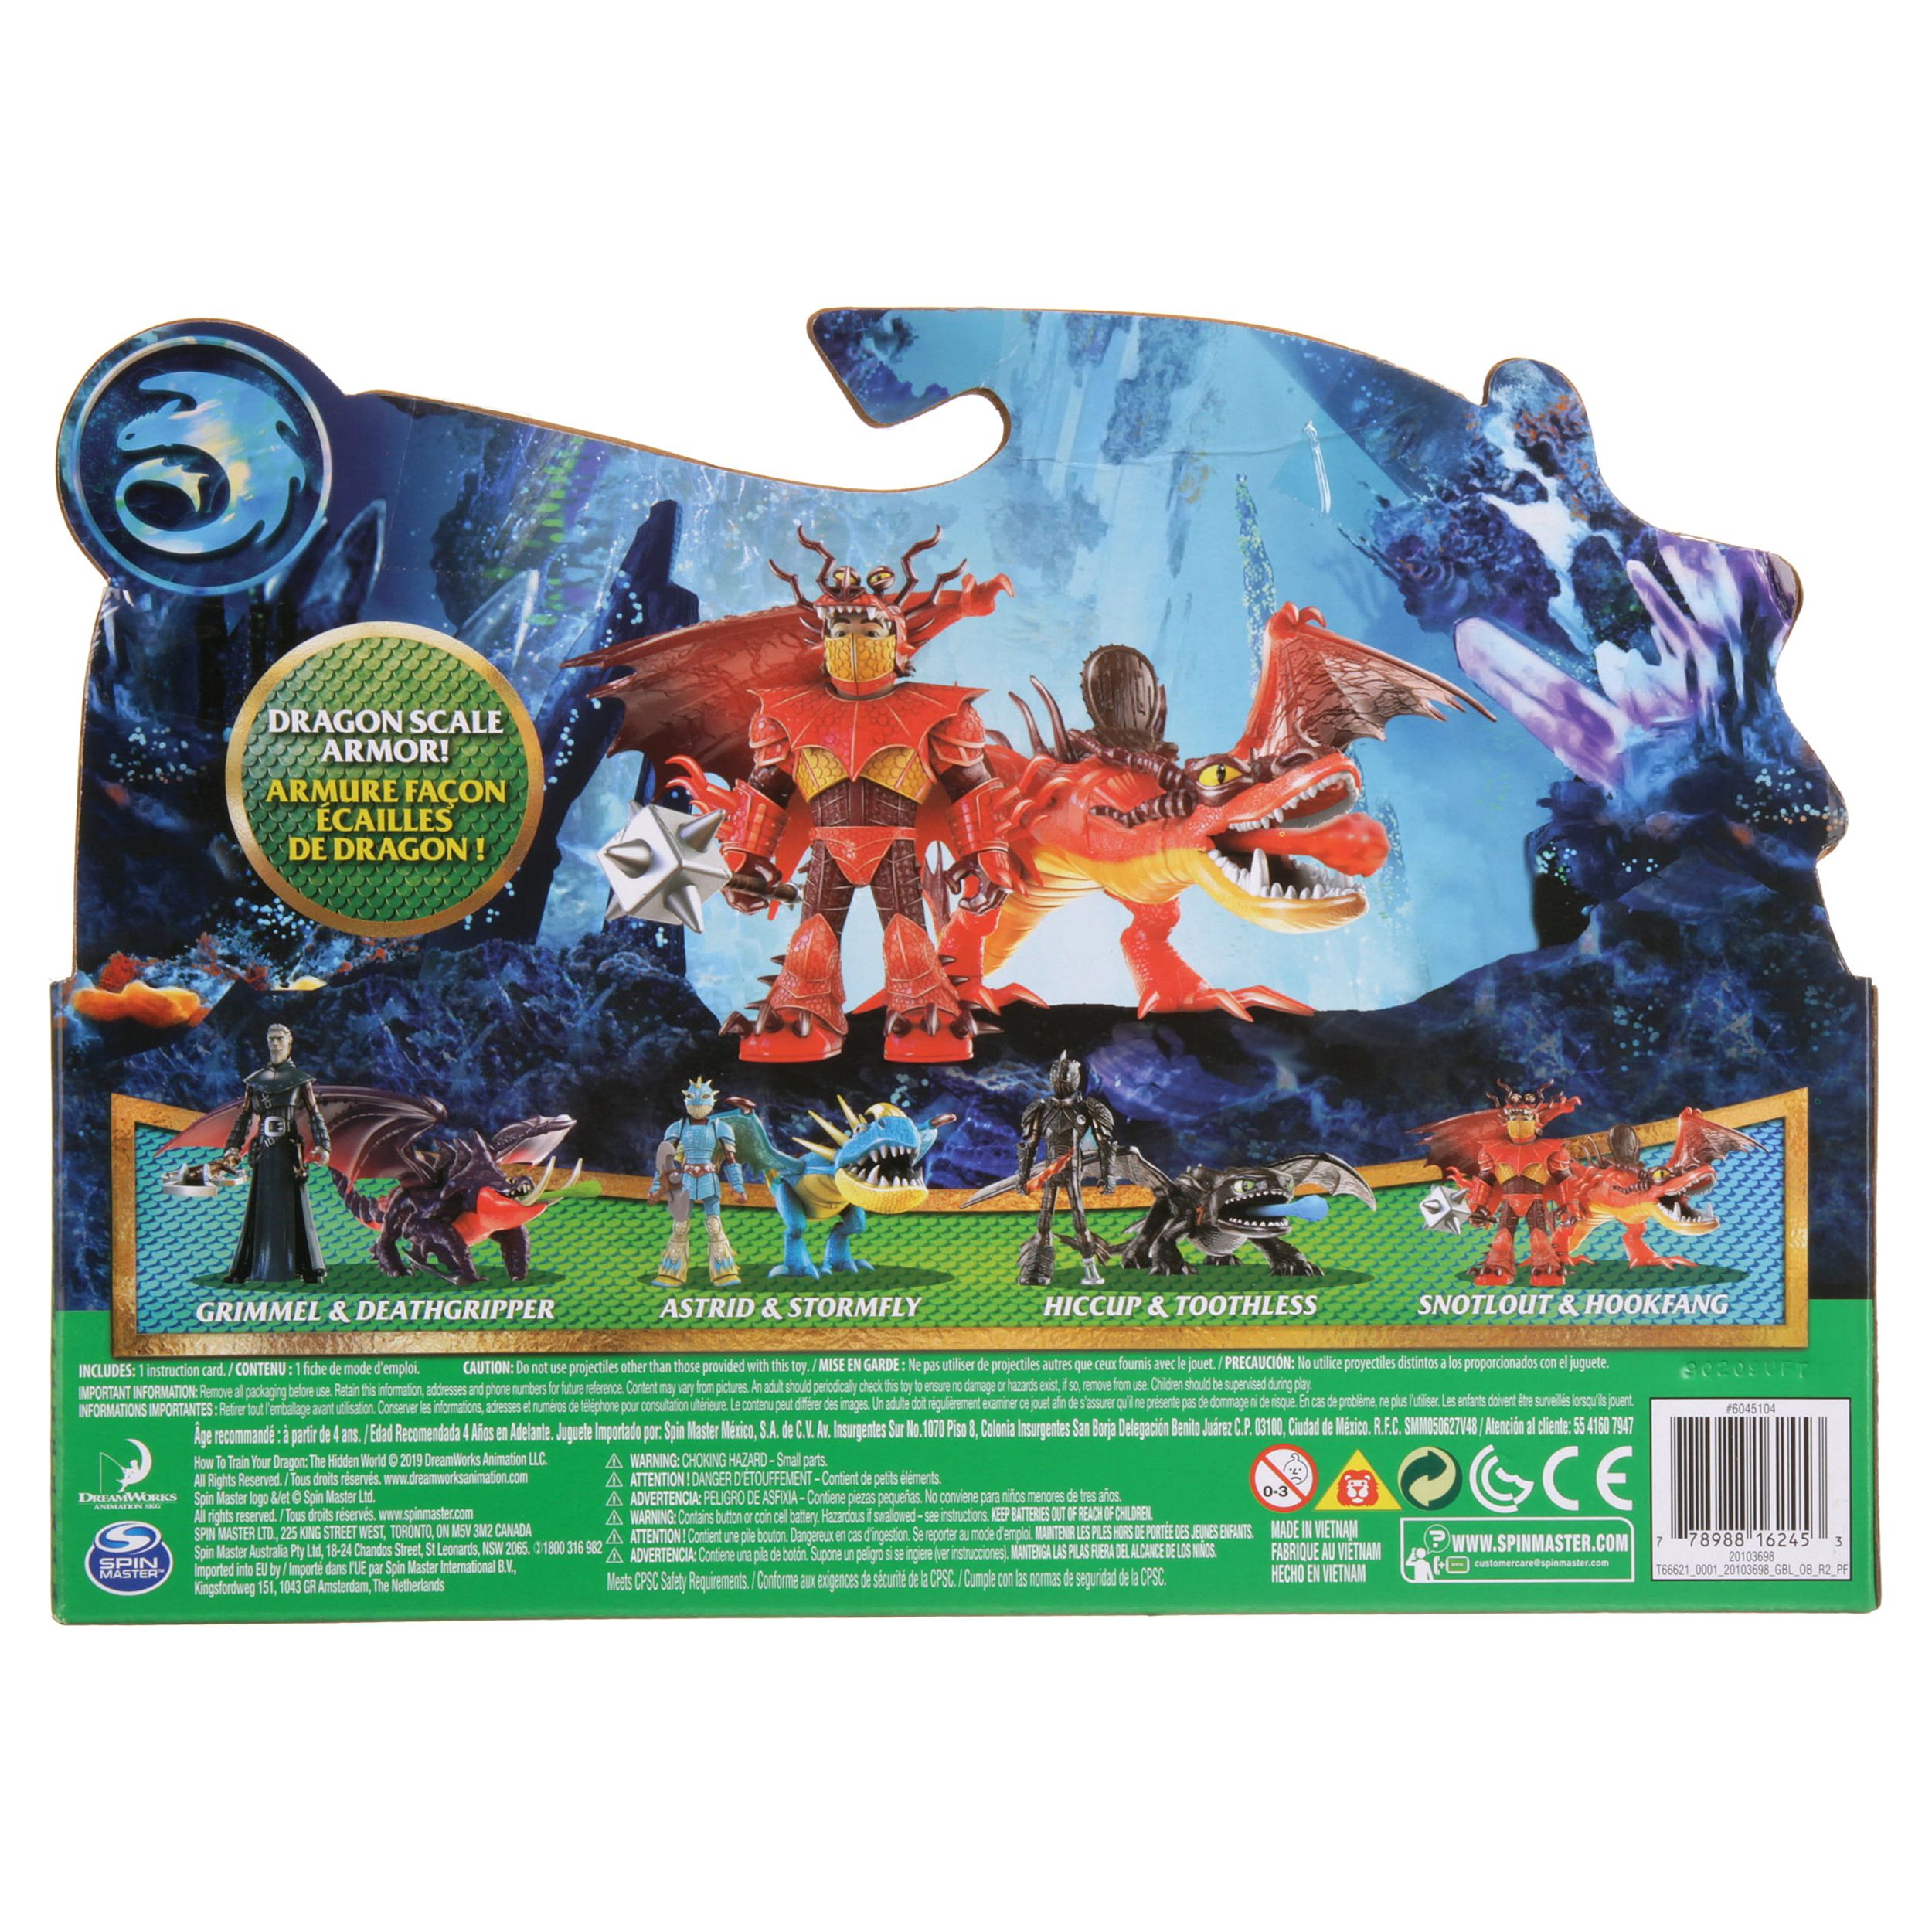 DreamWorks Dragons, Hookfang and Snotlout, Dragon with Armored Viking Figure, for Kids Aged 4 and Up - image 3 of 7